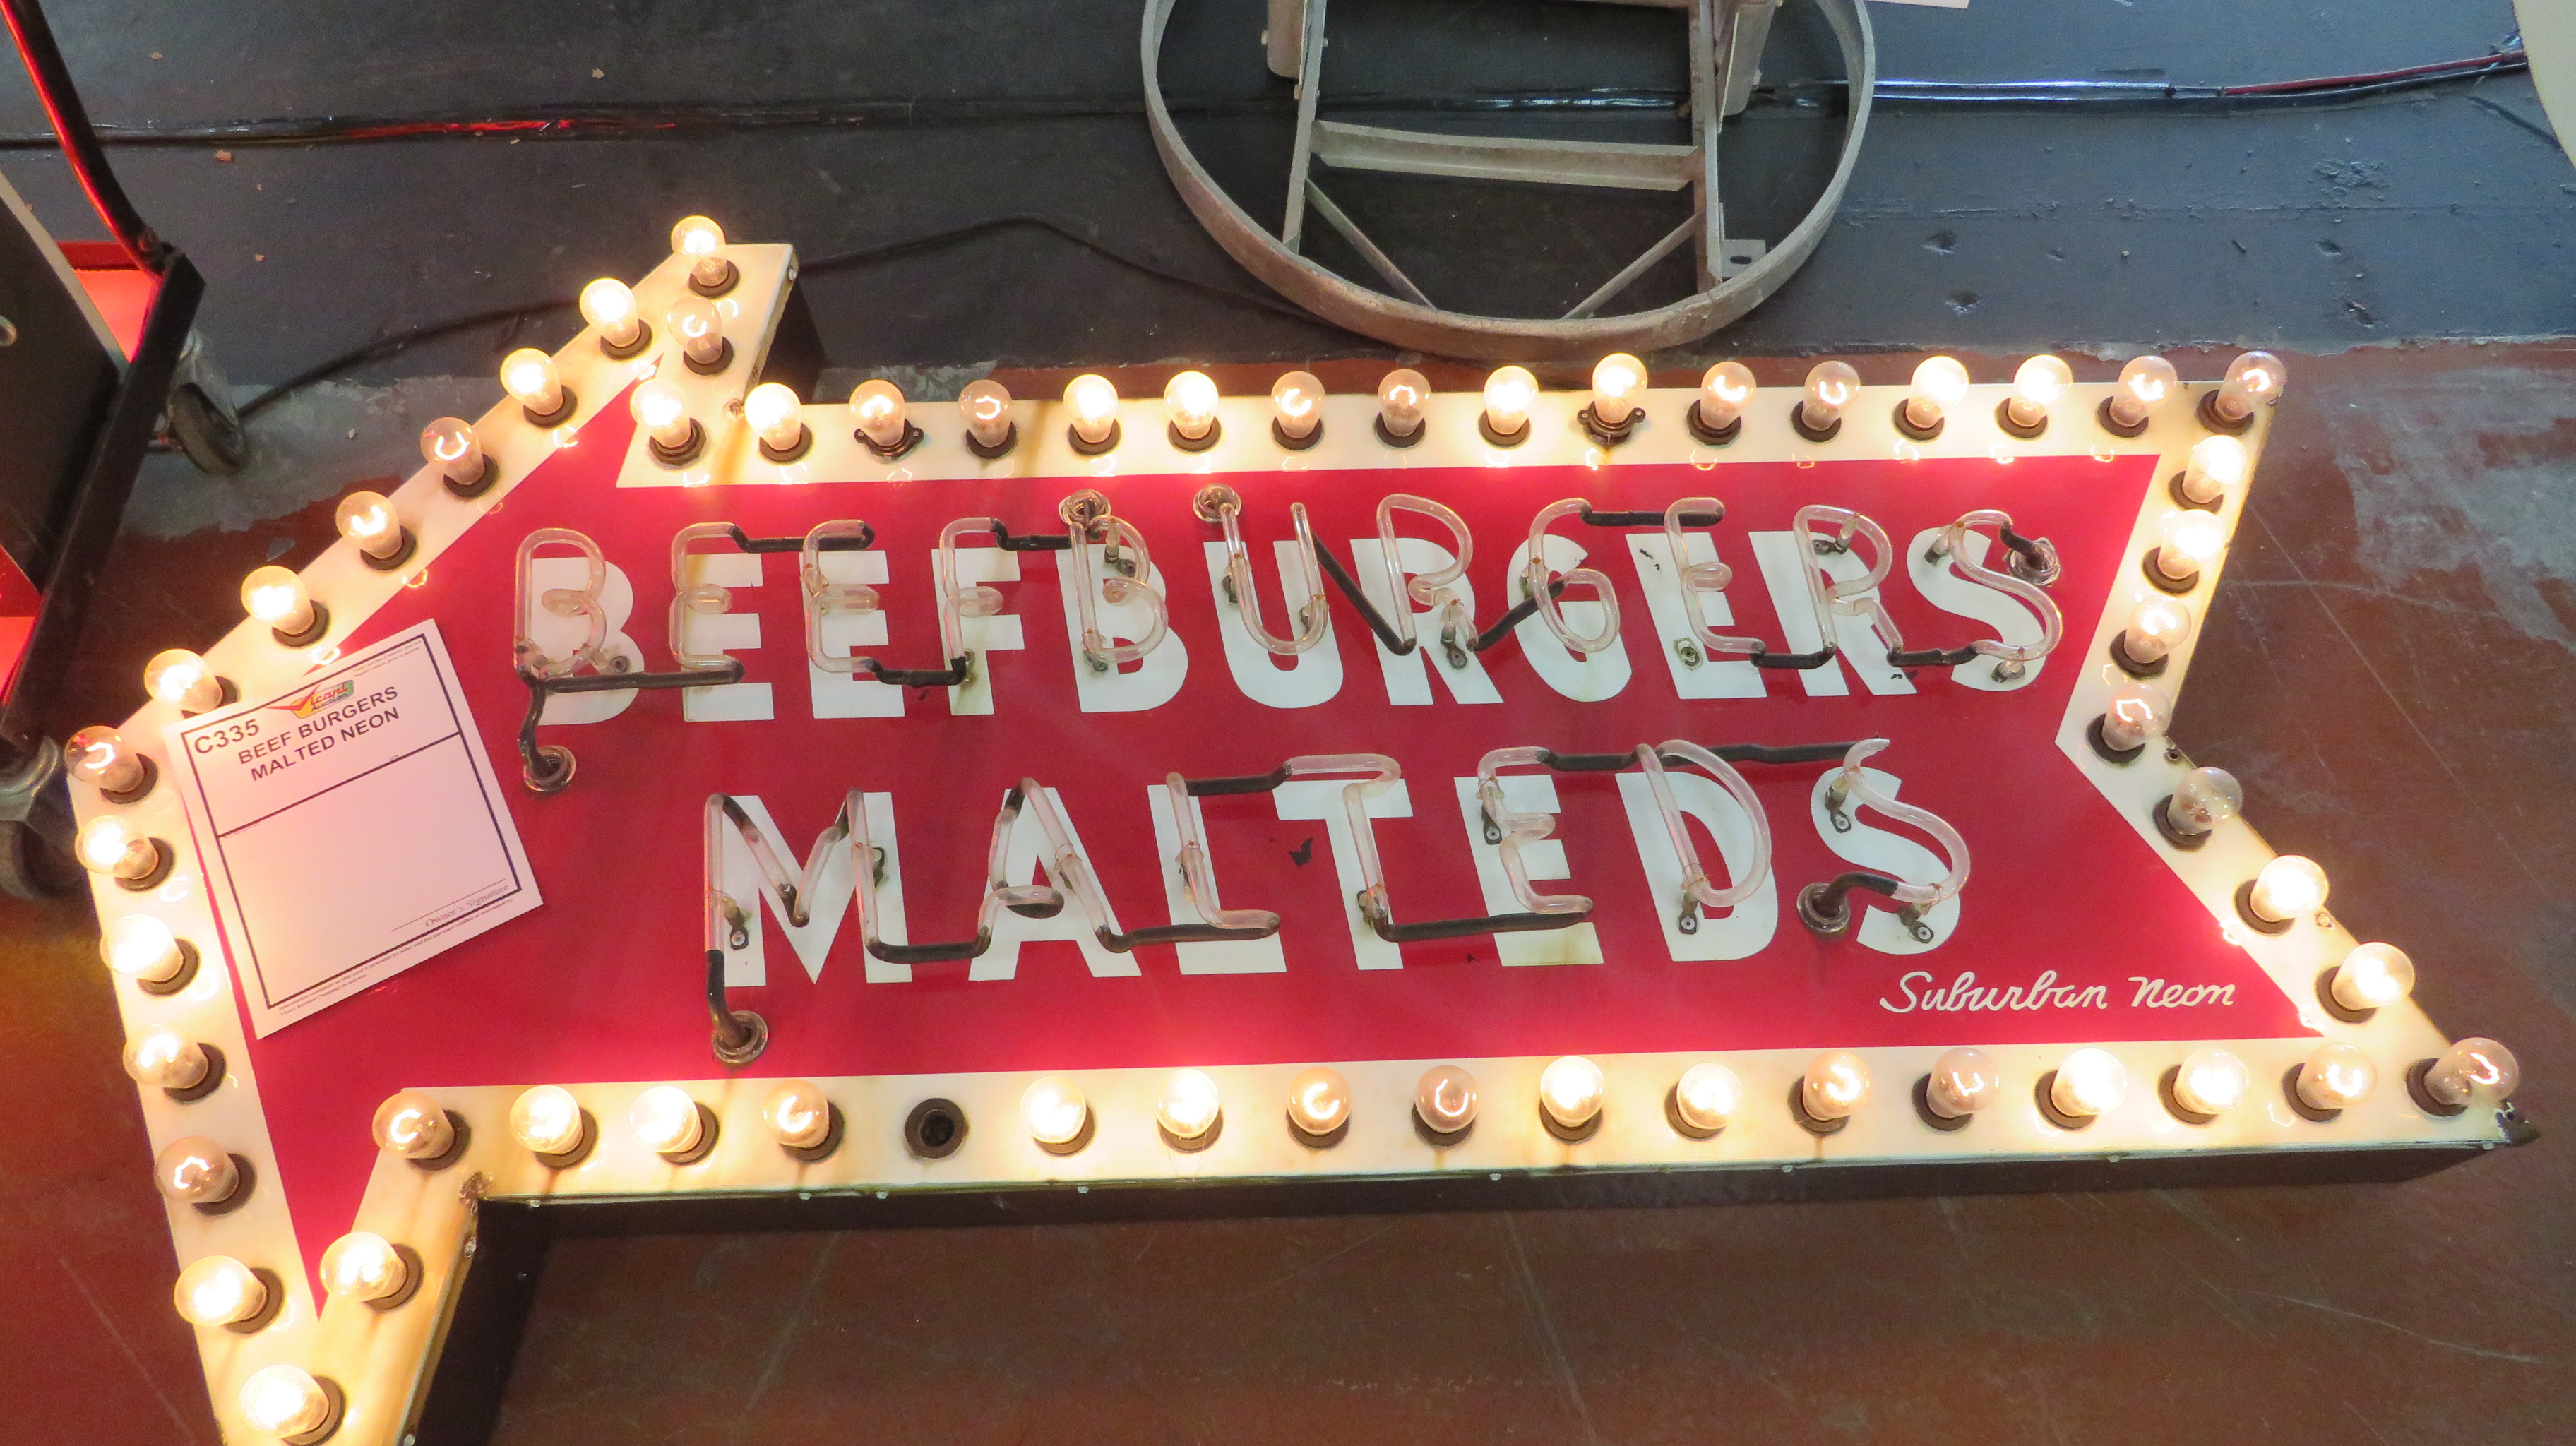 0th Image of a N/A BEEF BURGERS MALTED NEON